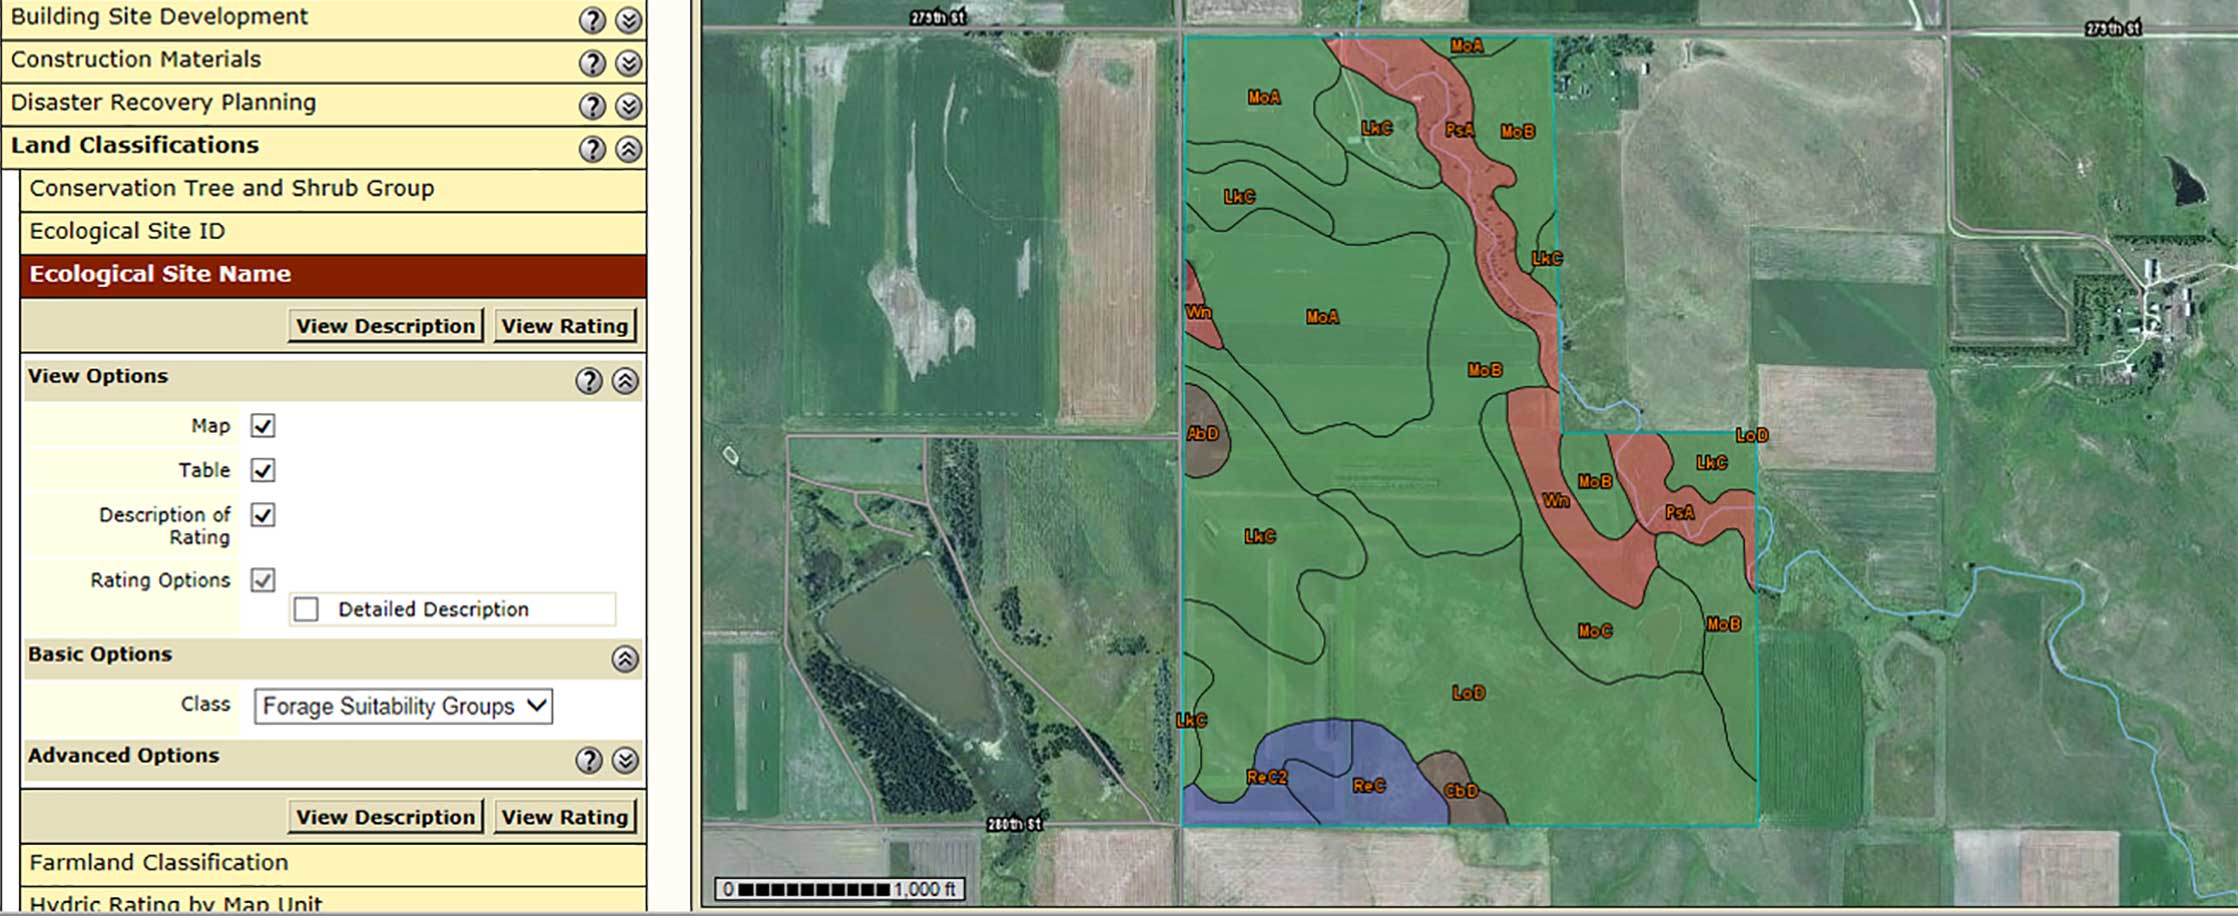 A ranch inventory map developed using the NRCS Web Soil Survey application. For a complete description, call SDSU Extension at 605-688-6729.